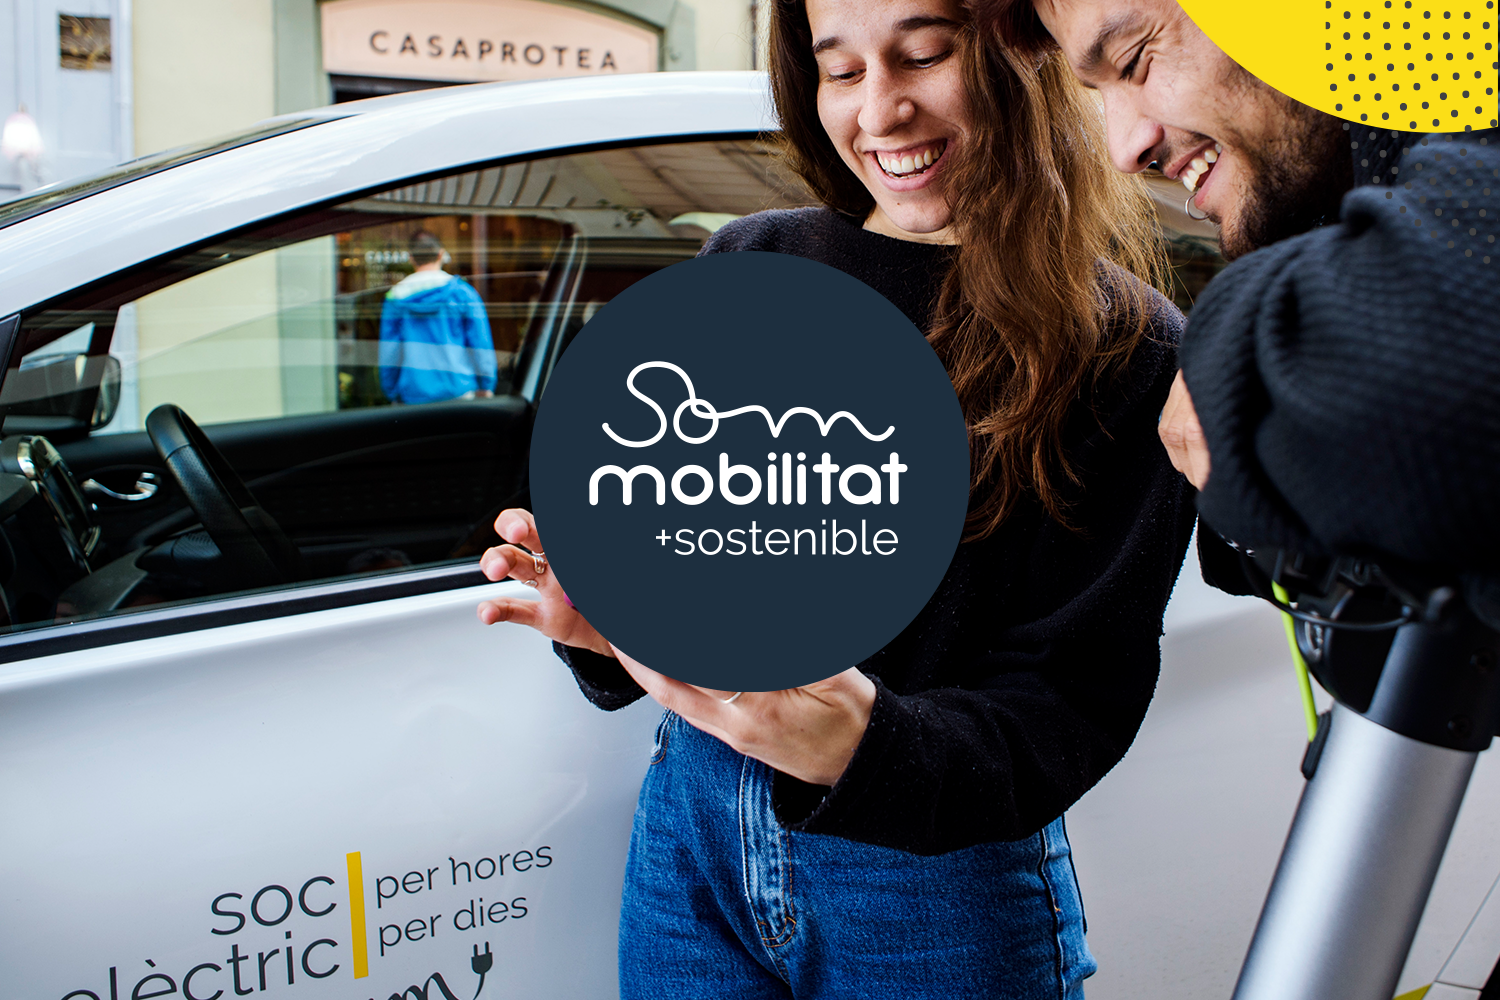 Image with to persons in front of a car. One person which can be read as female holds a smartphone in her hand and shows the display to the other person. The car is an electric car which belongs to the company of Som Mobilitat, an electric carsharing cooperative.